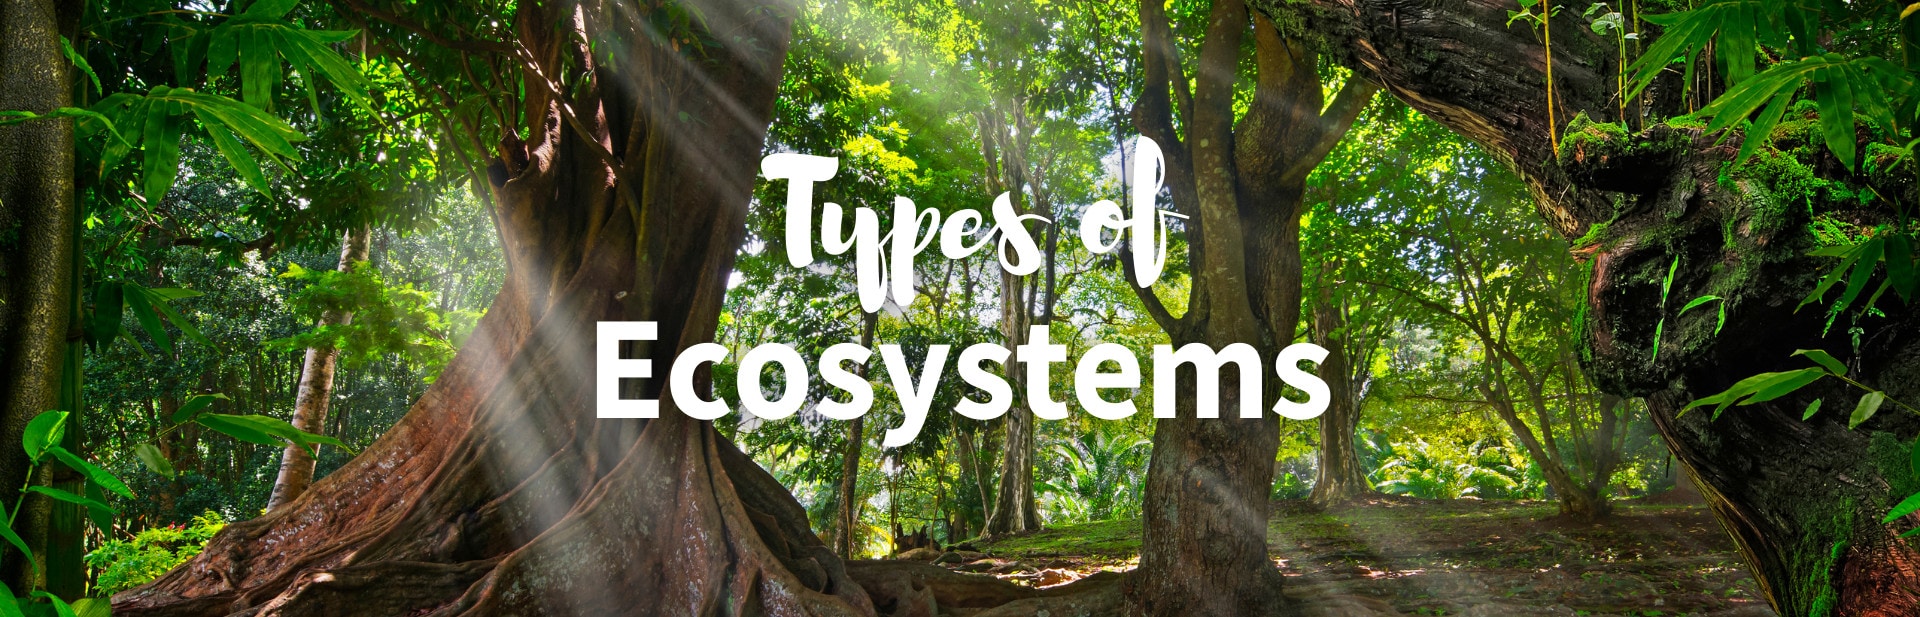 12 Different Types of Ecosystems and Why They Are Important